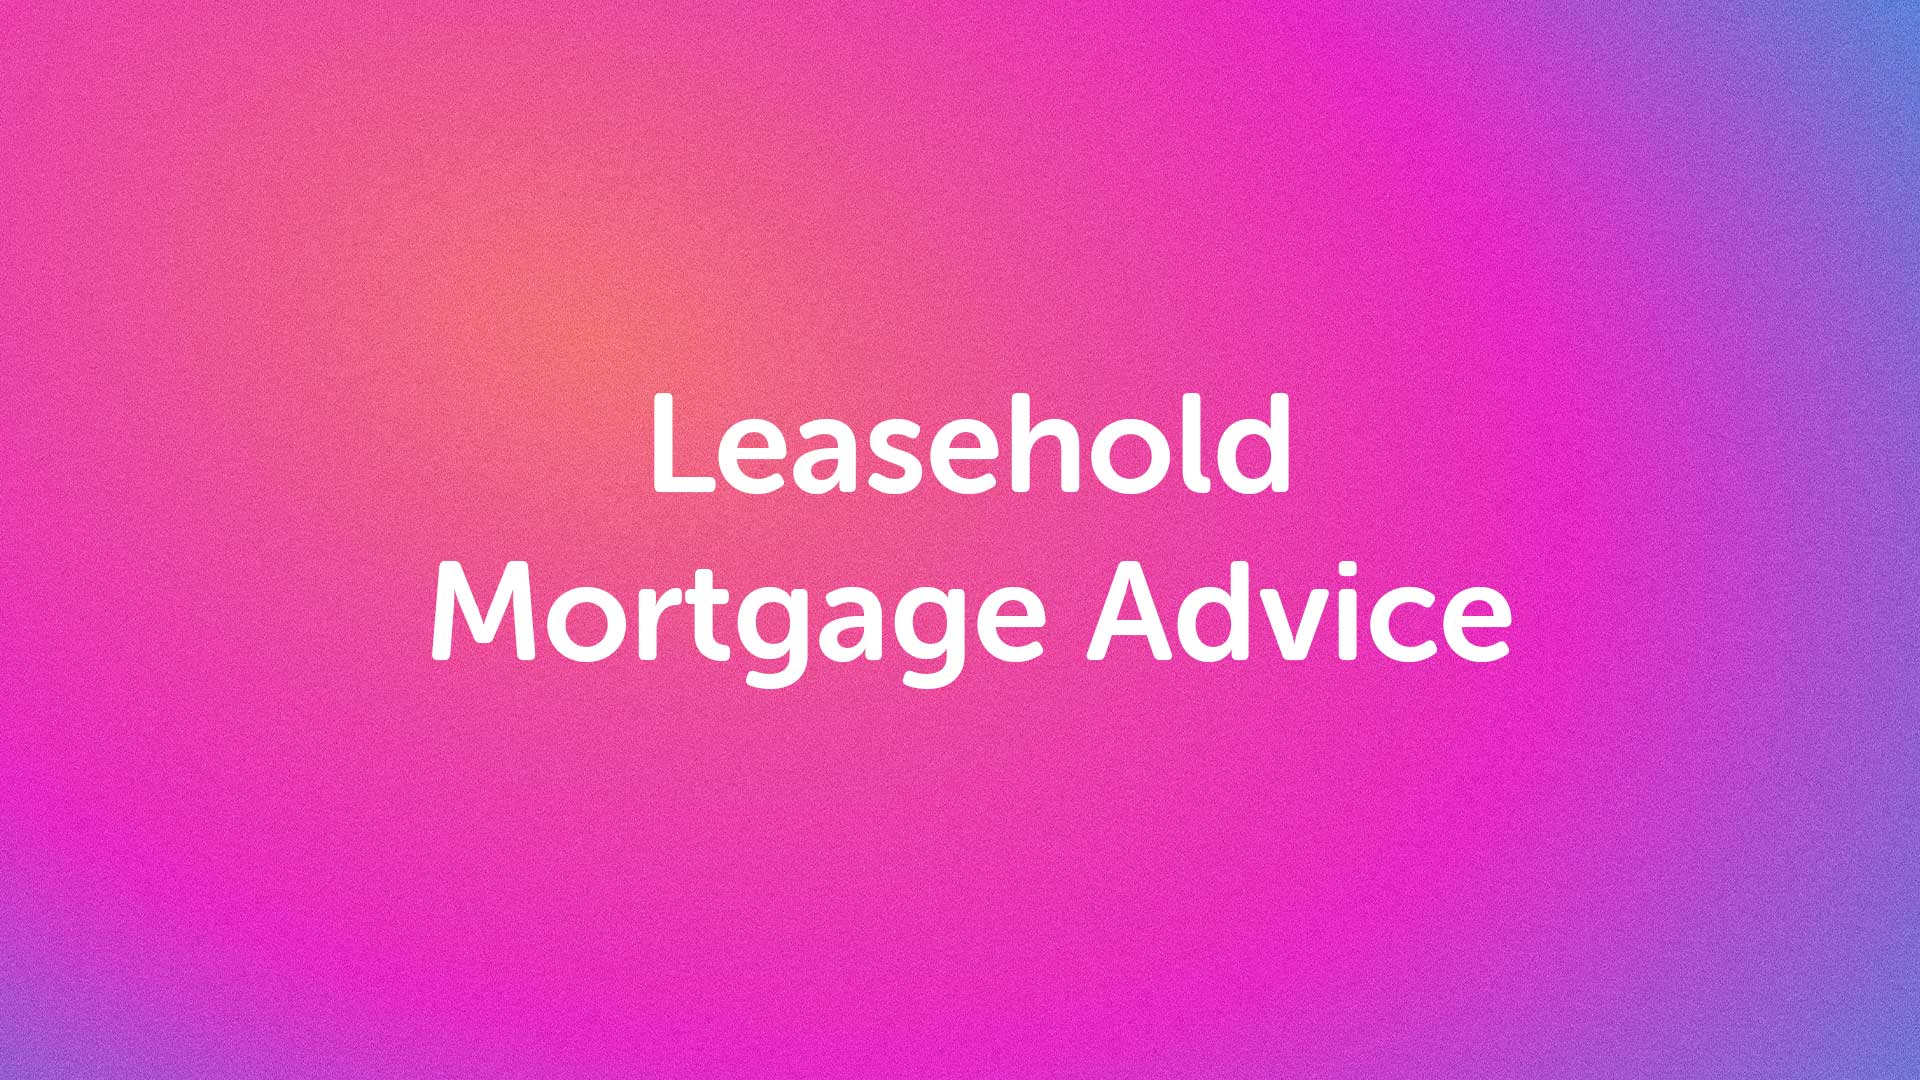 Leasehold Houses Mortgage Advice in Birmingham